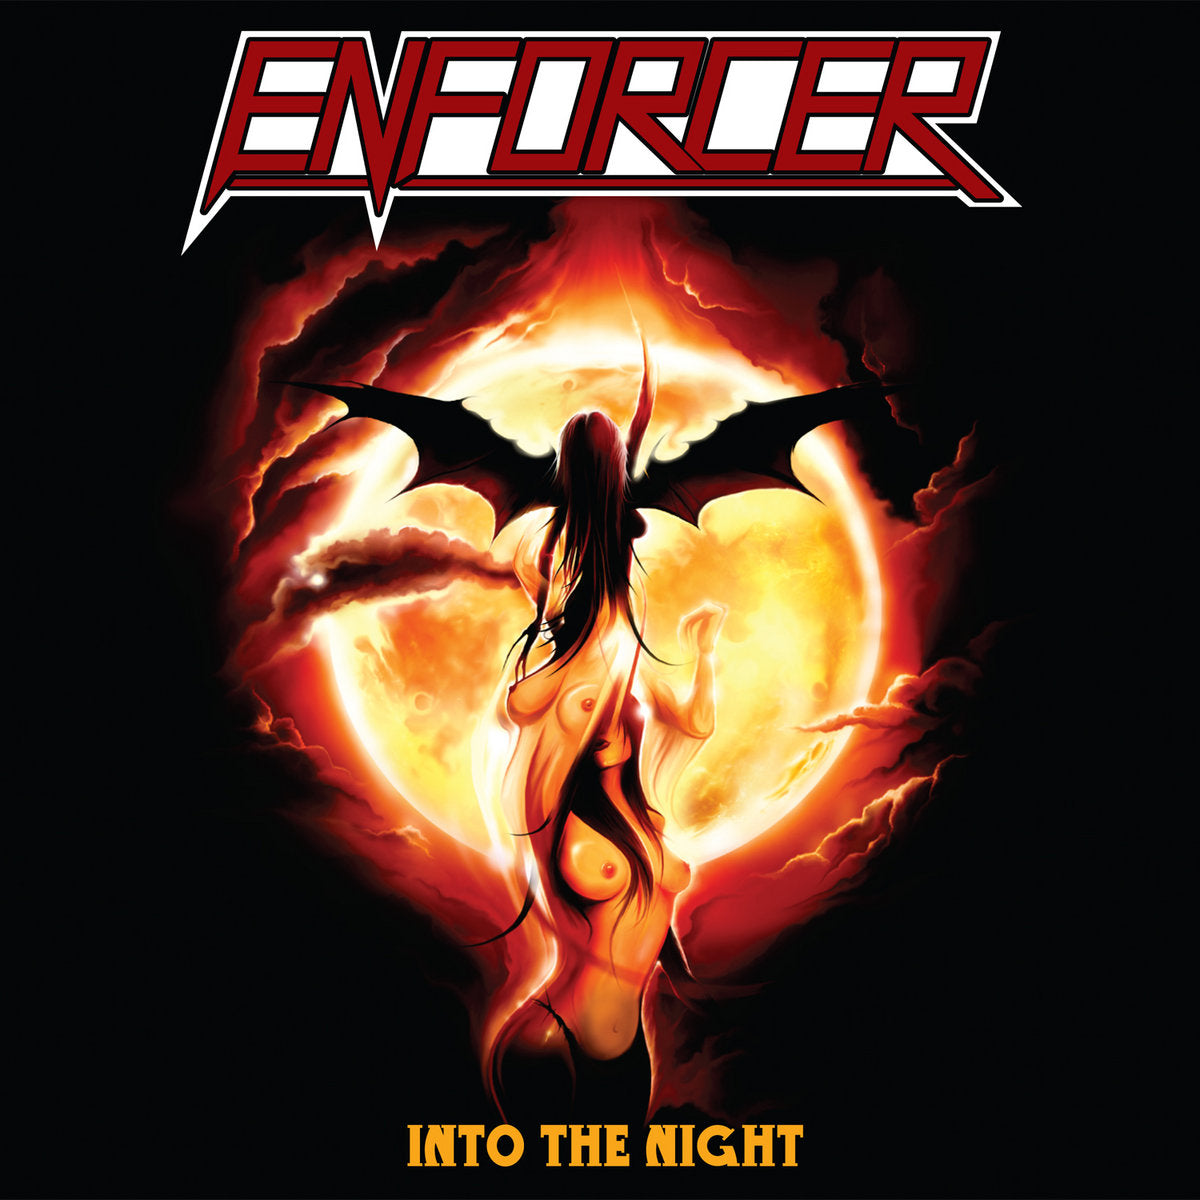 Enforcer "Into The Night" CD